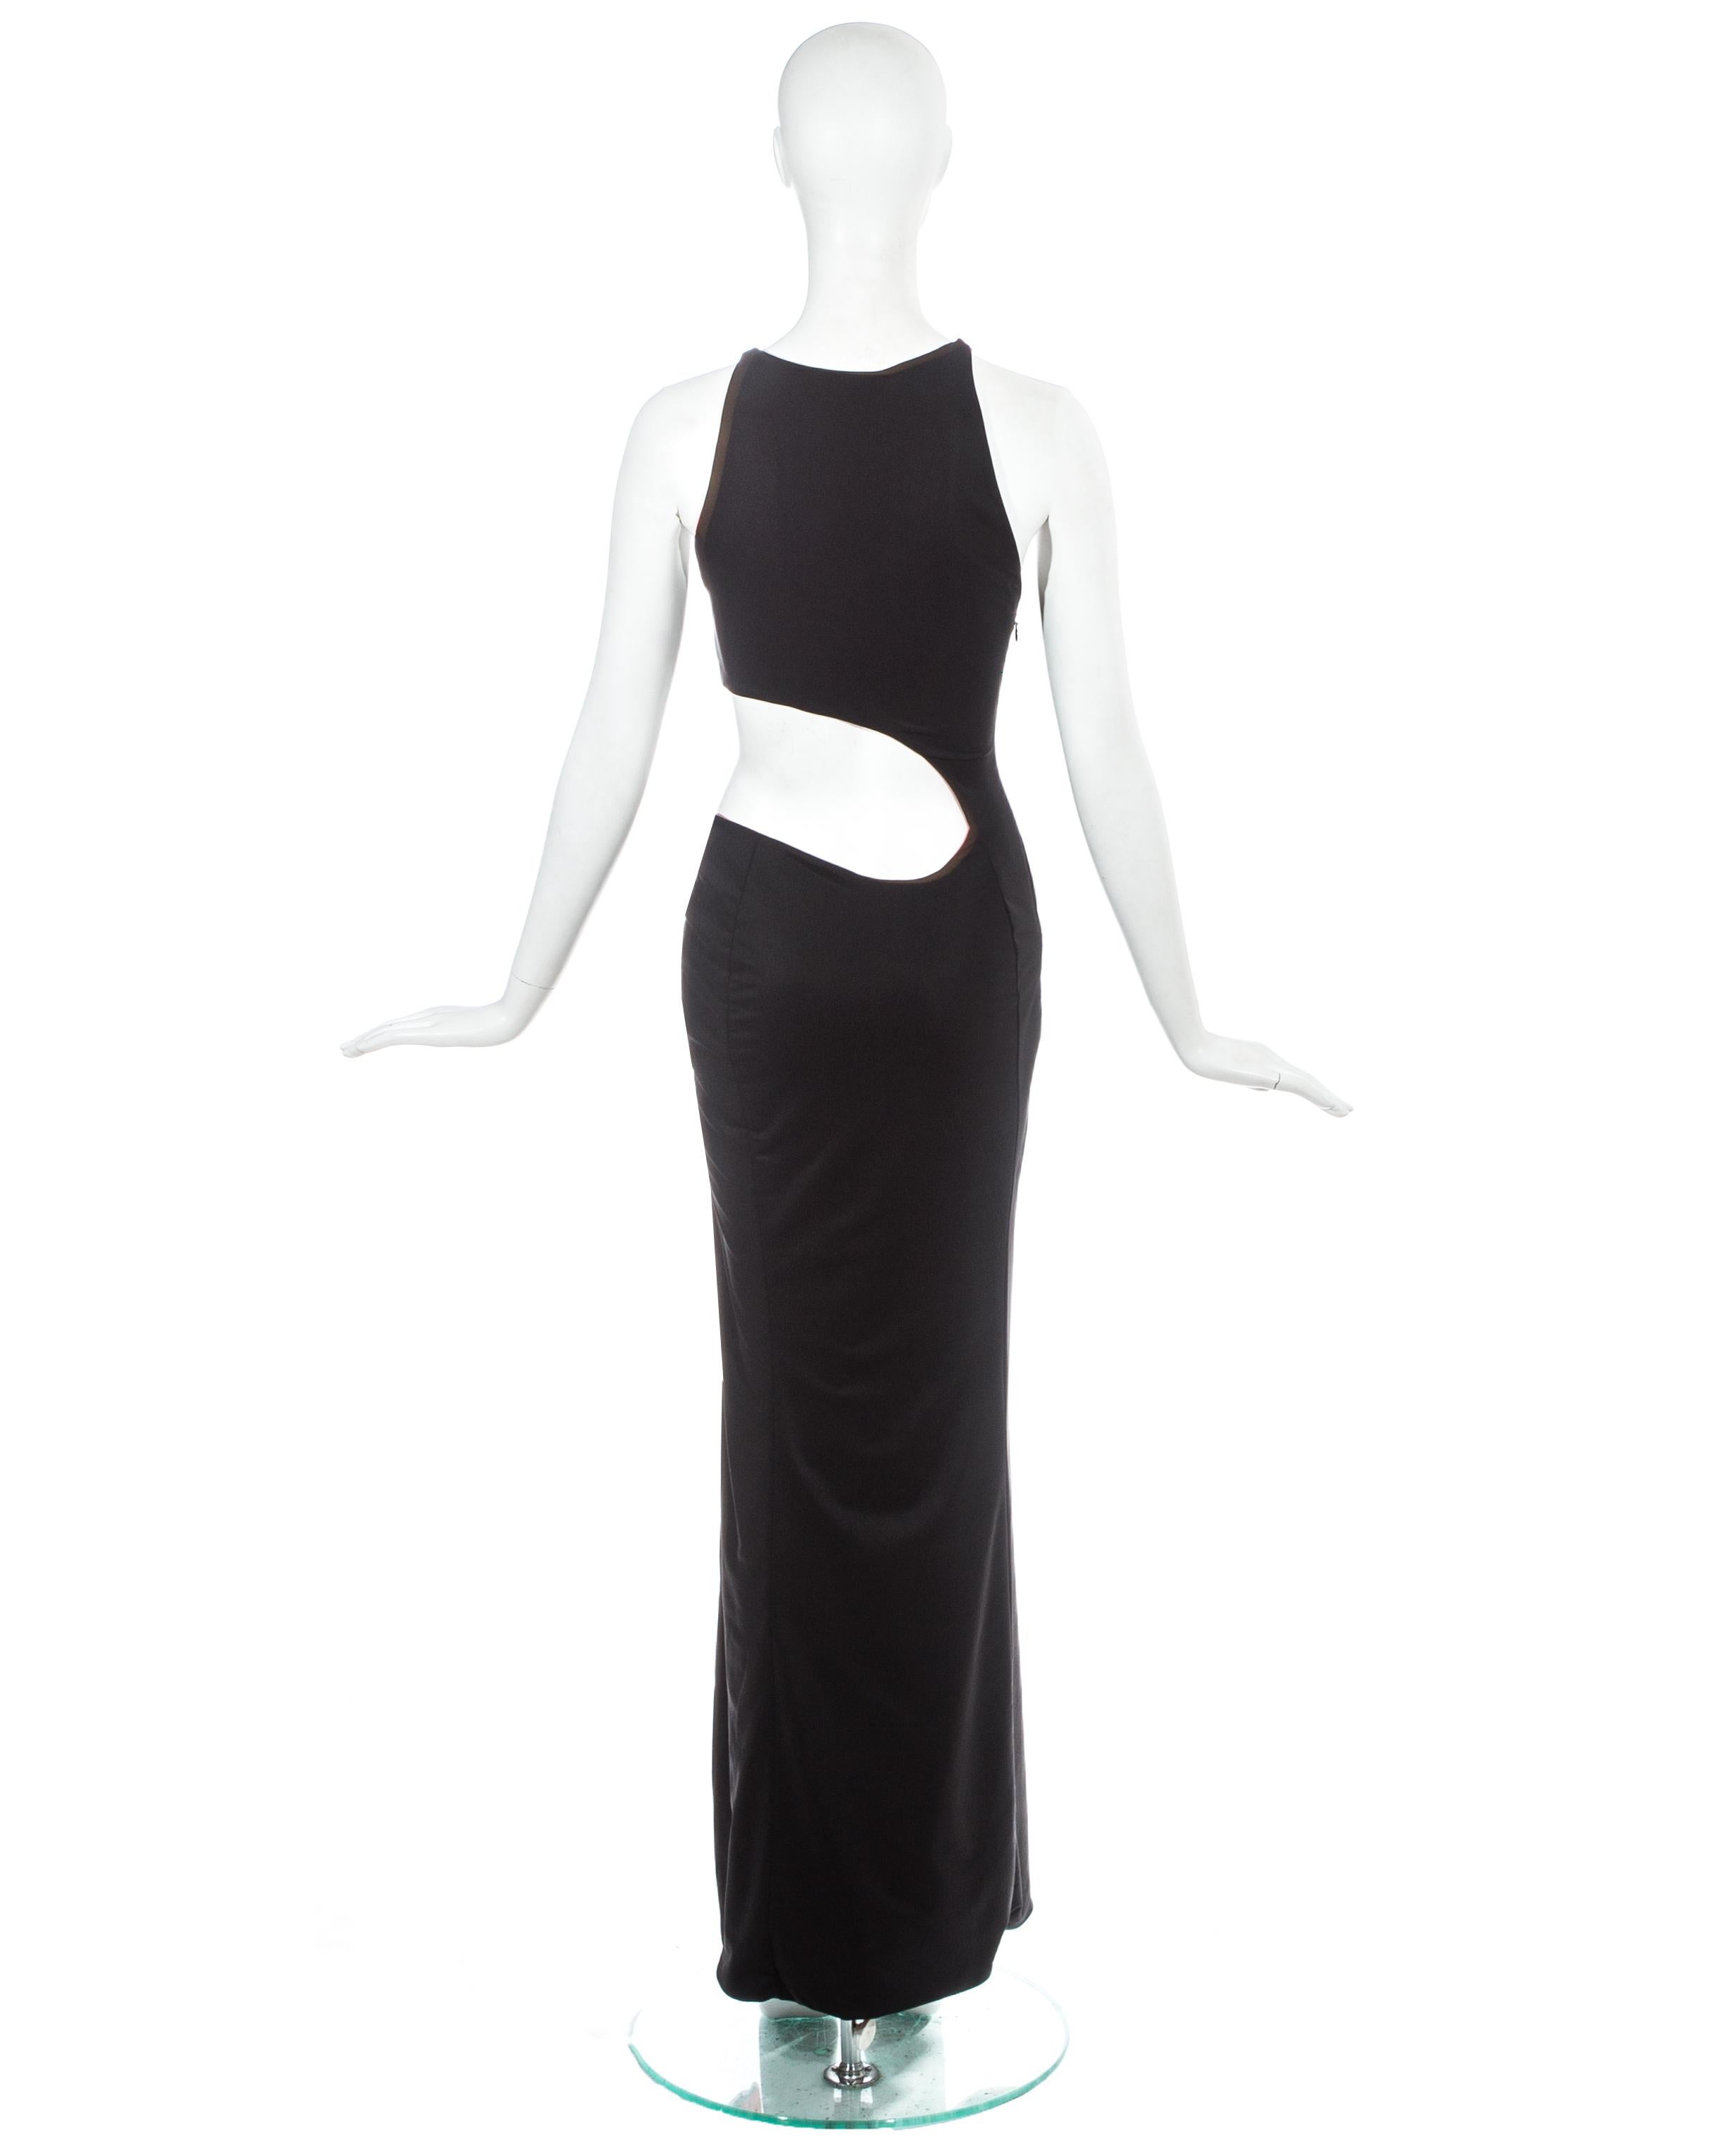 Women's Gianni Versace black jersey evening dress with cut out and leg slit, ss 1998